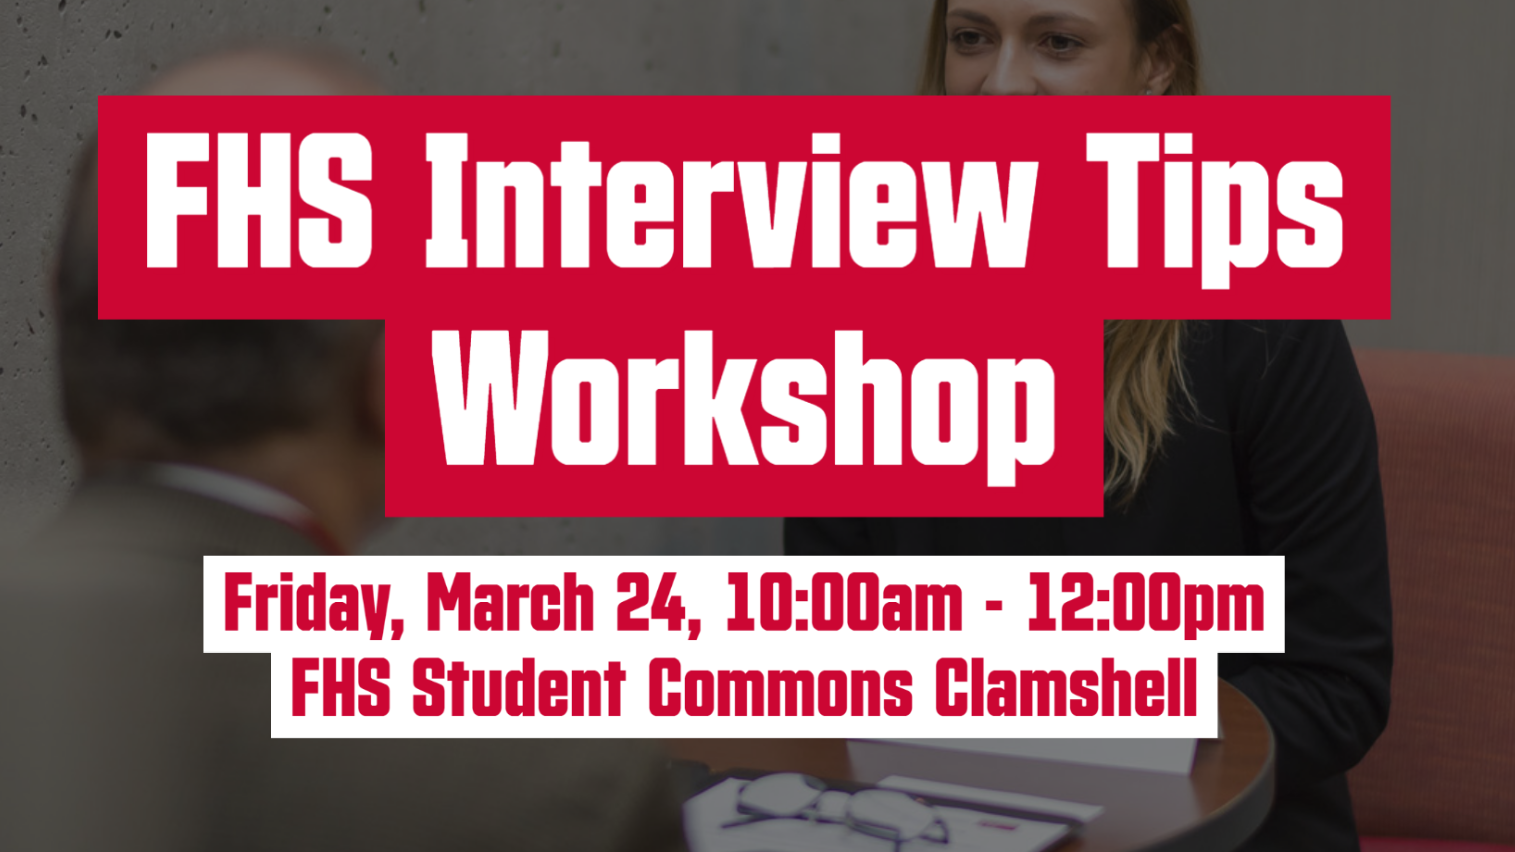 Friday, March 24: FHS Interview Tips  Workshop